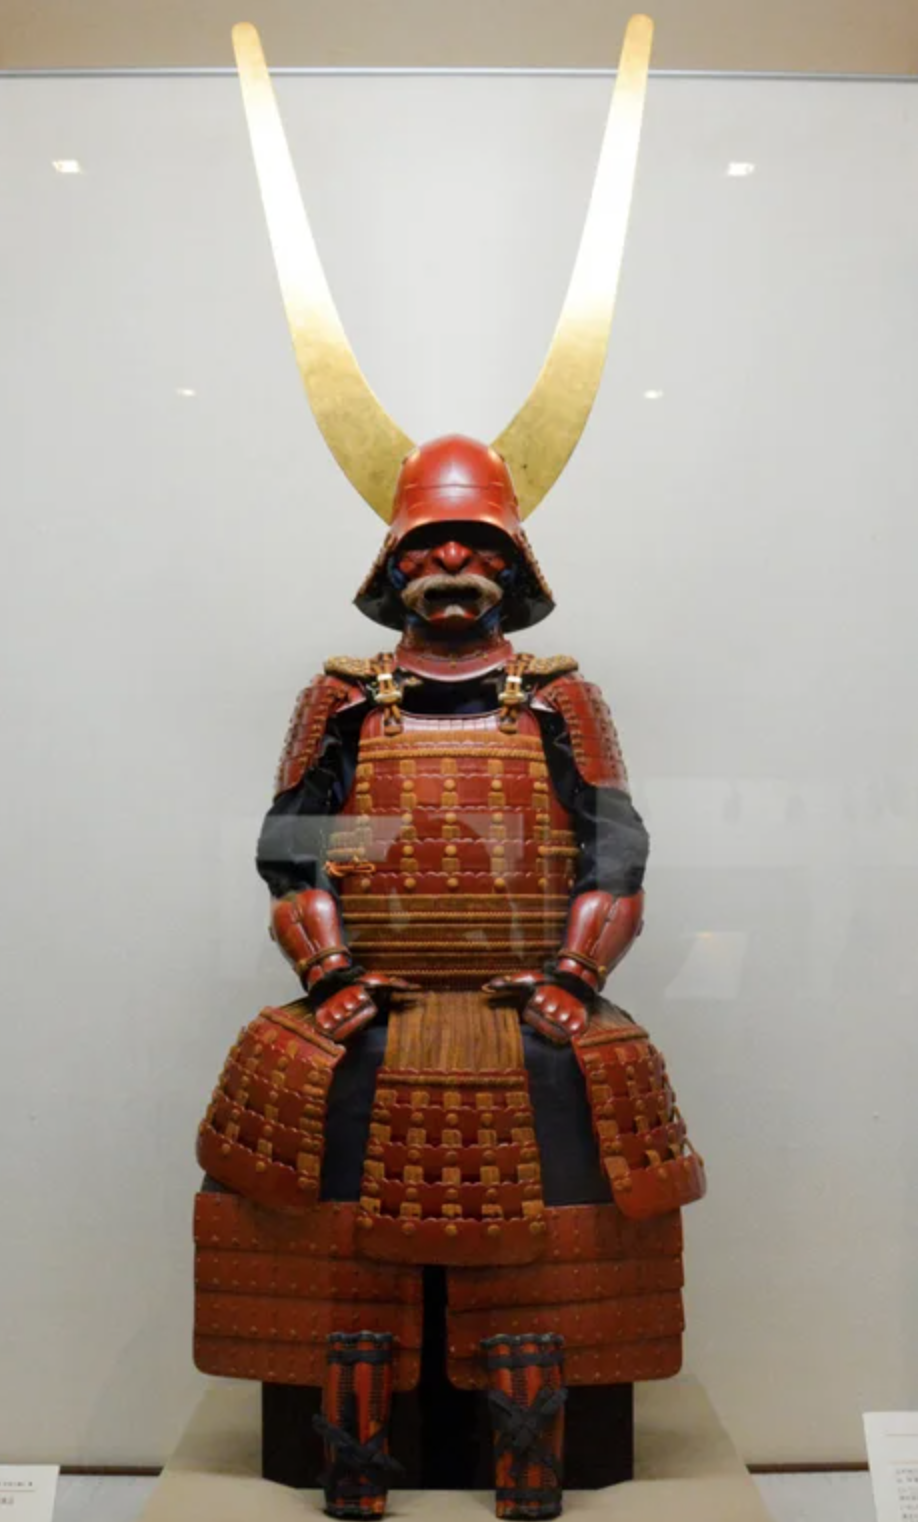 fascinating artifacts - The red armor of lord Ii Naotaka, with gold horns. Japan, Edo period, 1600s